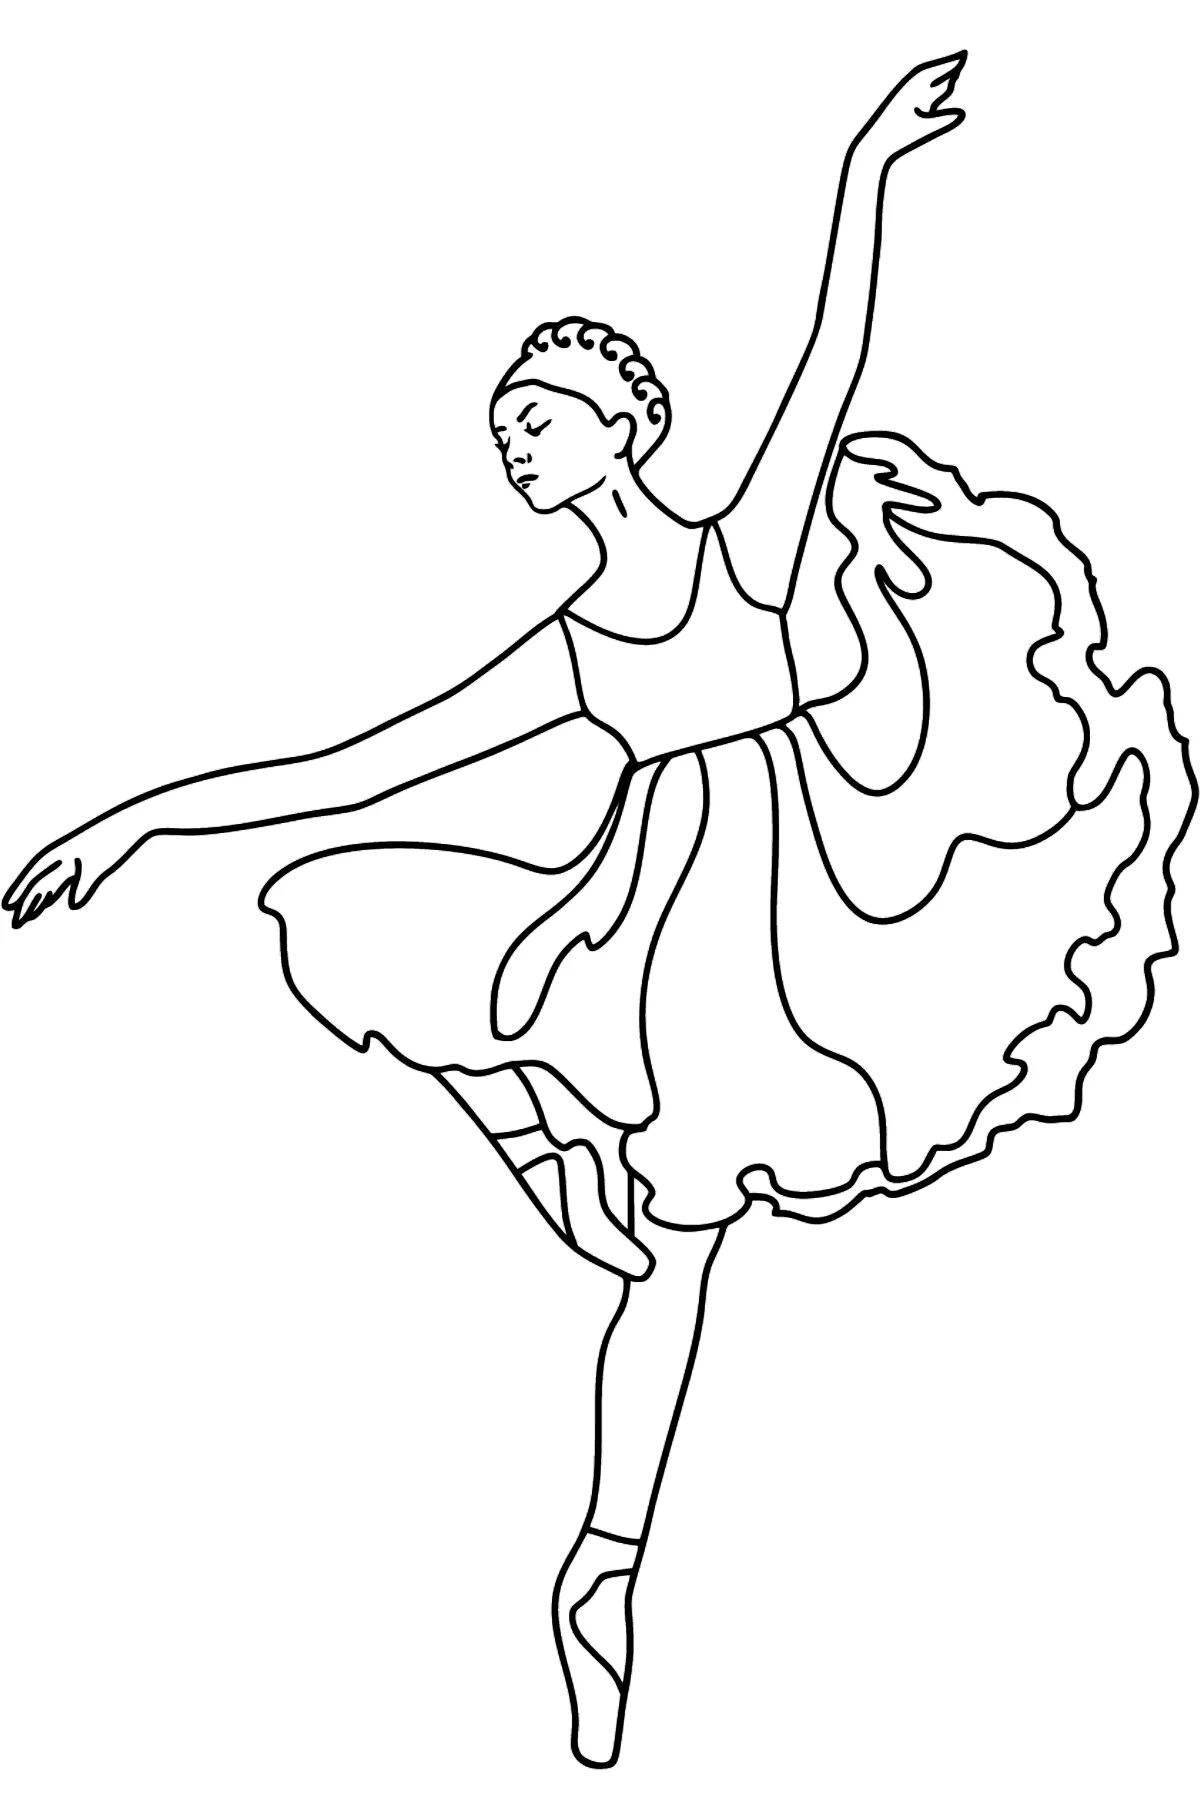 Coloring page amazing dancer